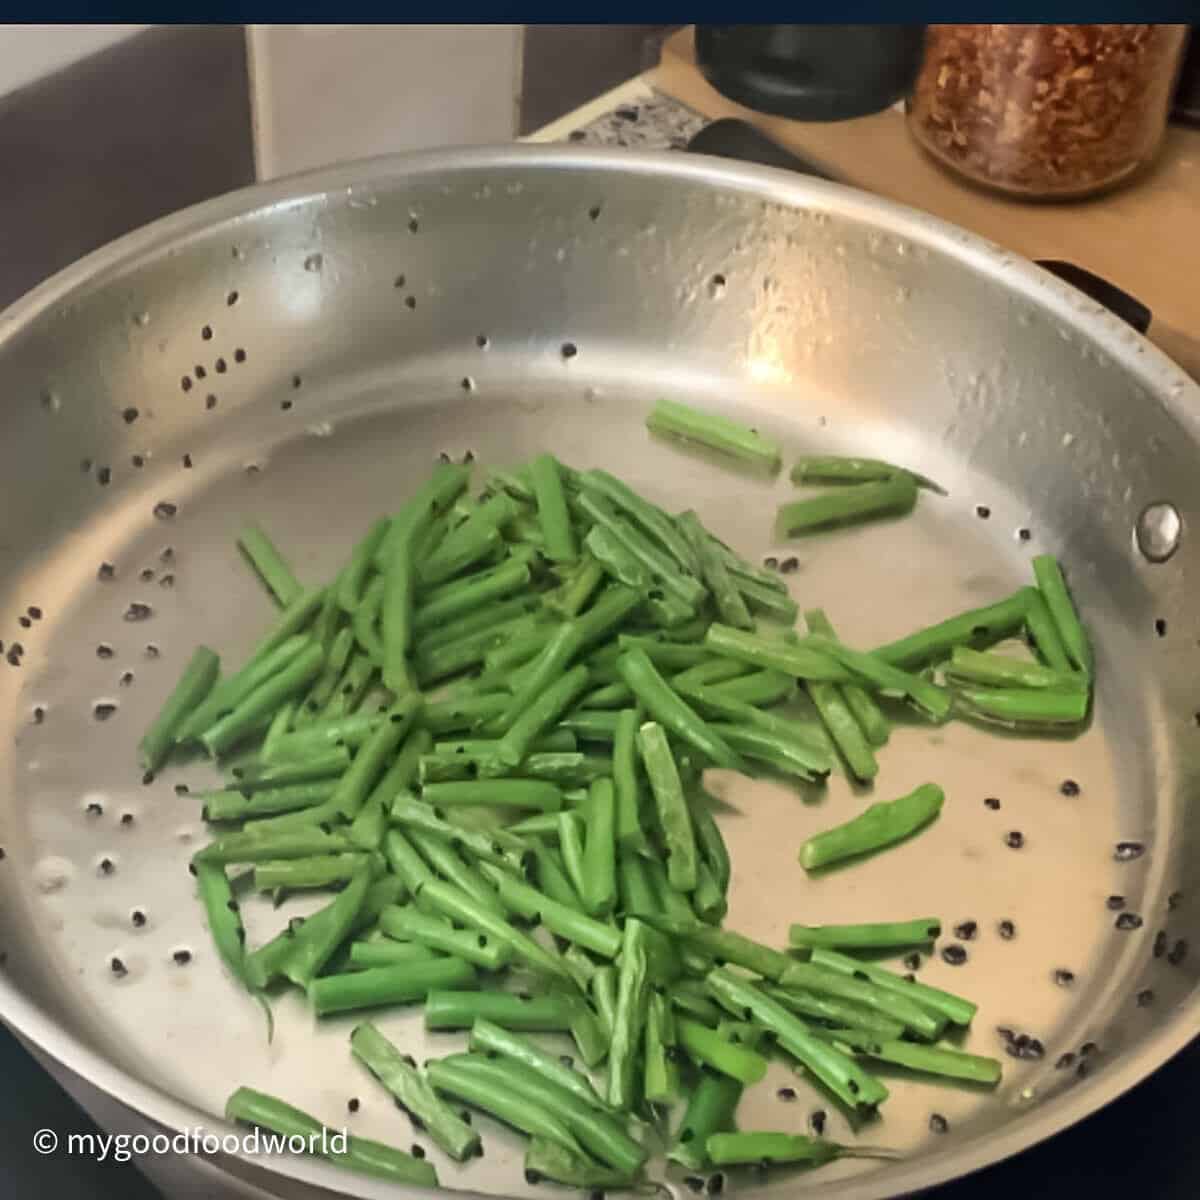 Tender green beans being sauteed in oil and nigella seeds in a steel frying pan.